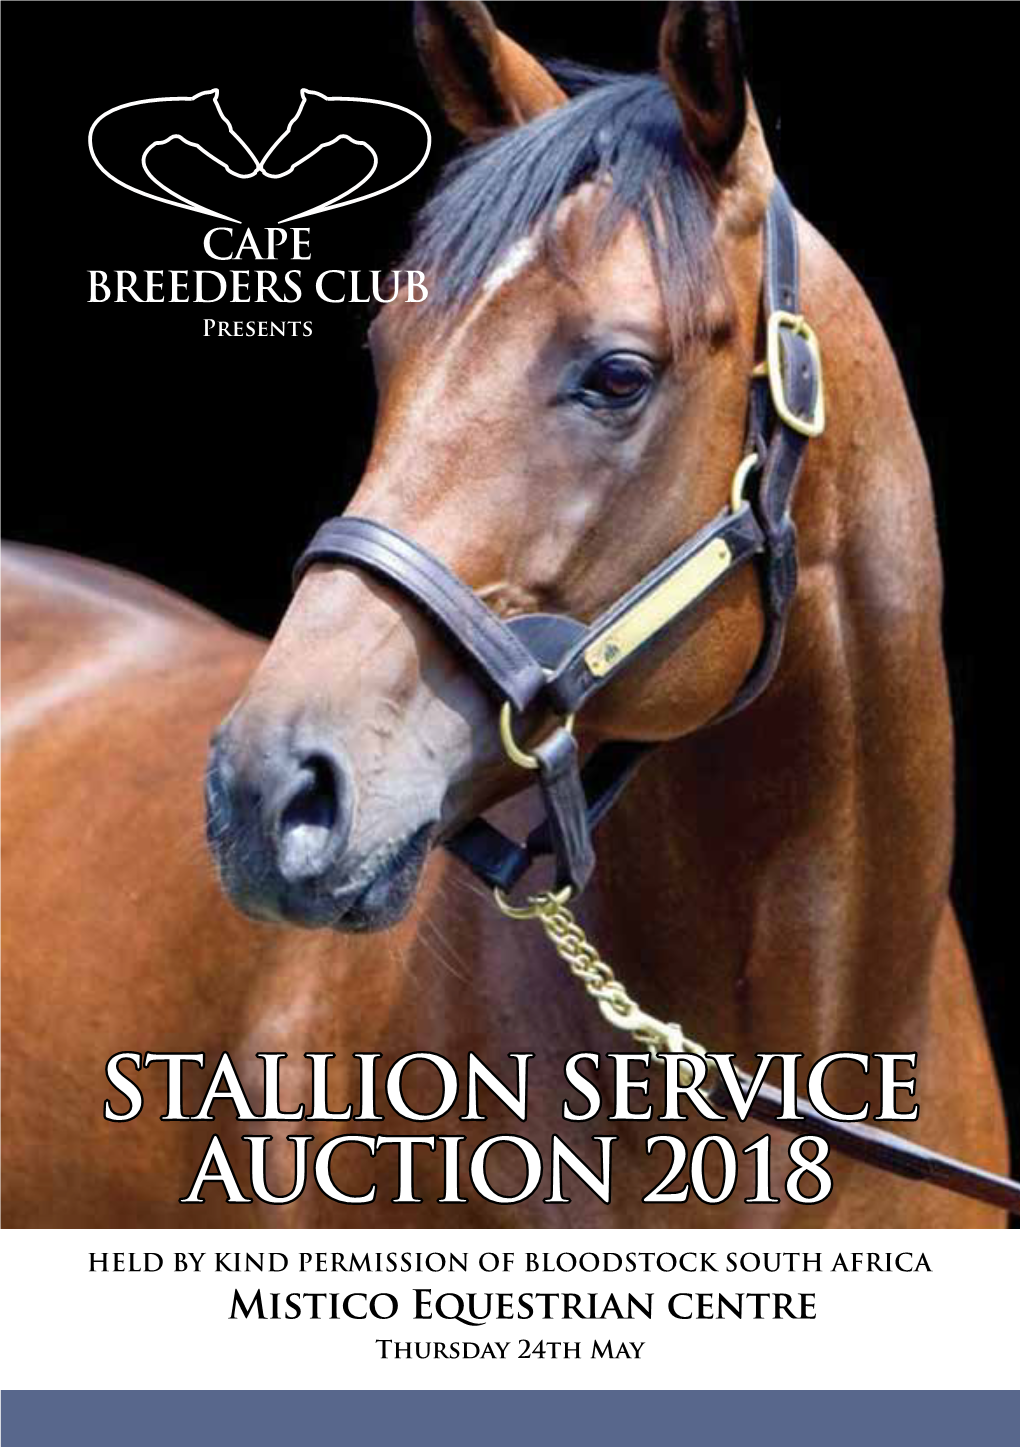 The Individual Sires Information Sheets – Click Here